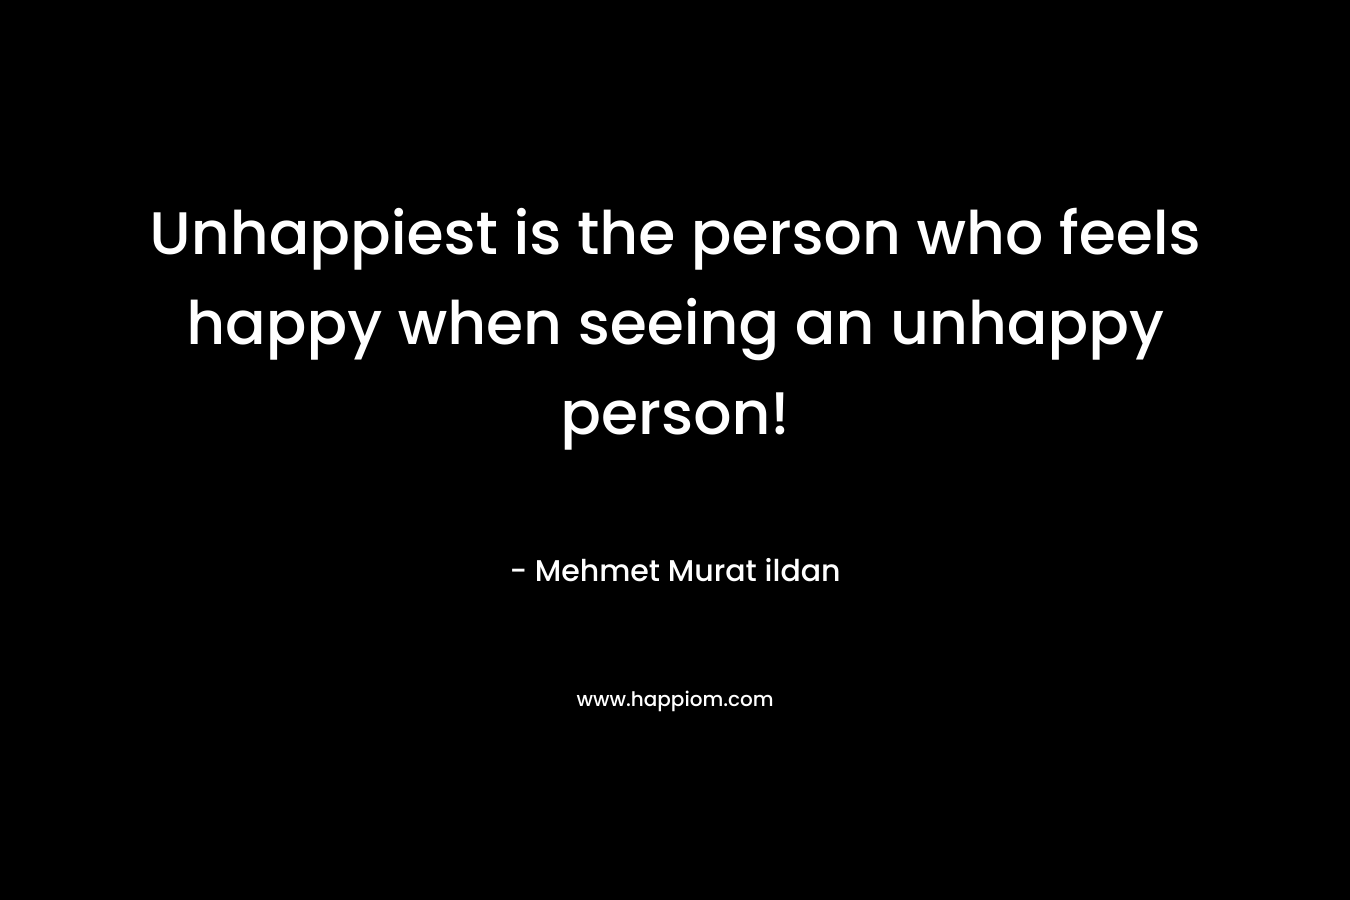 Unhappiest is the person who feels happy when seeing an unhappy person! – Mehmet Murat ildan